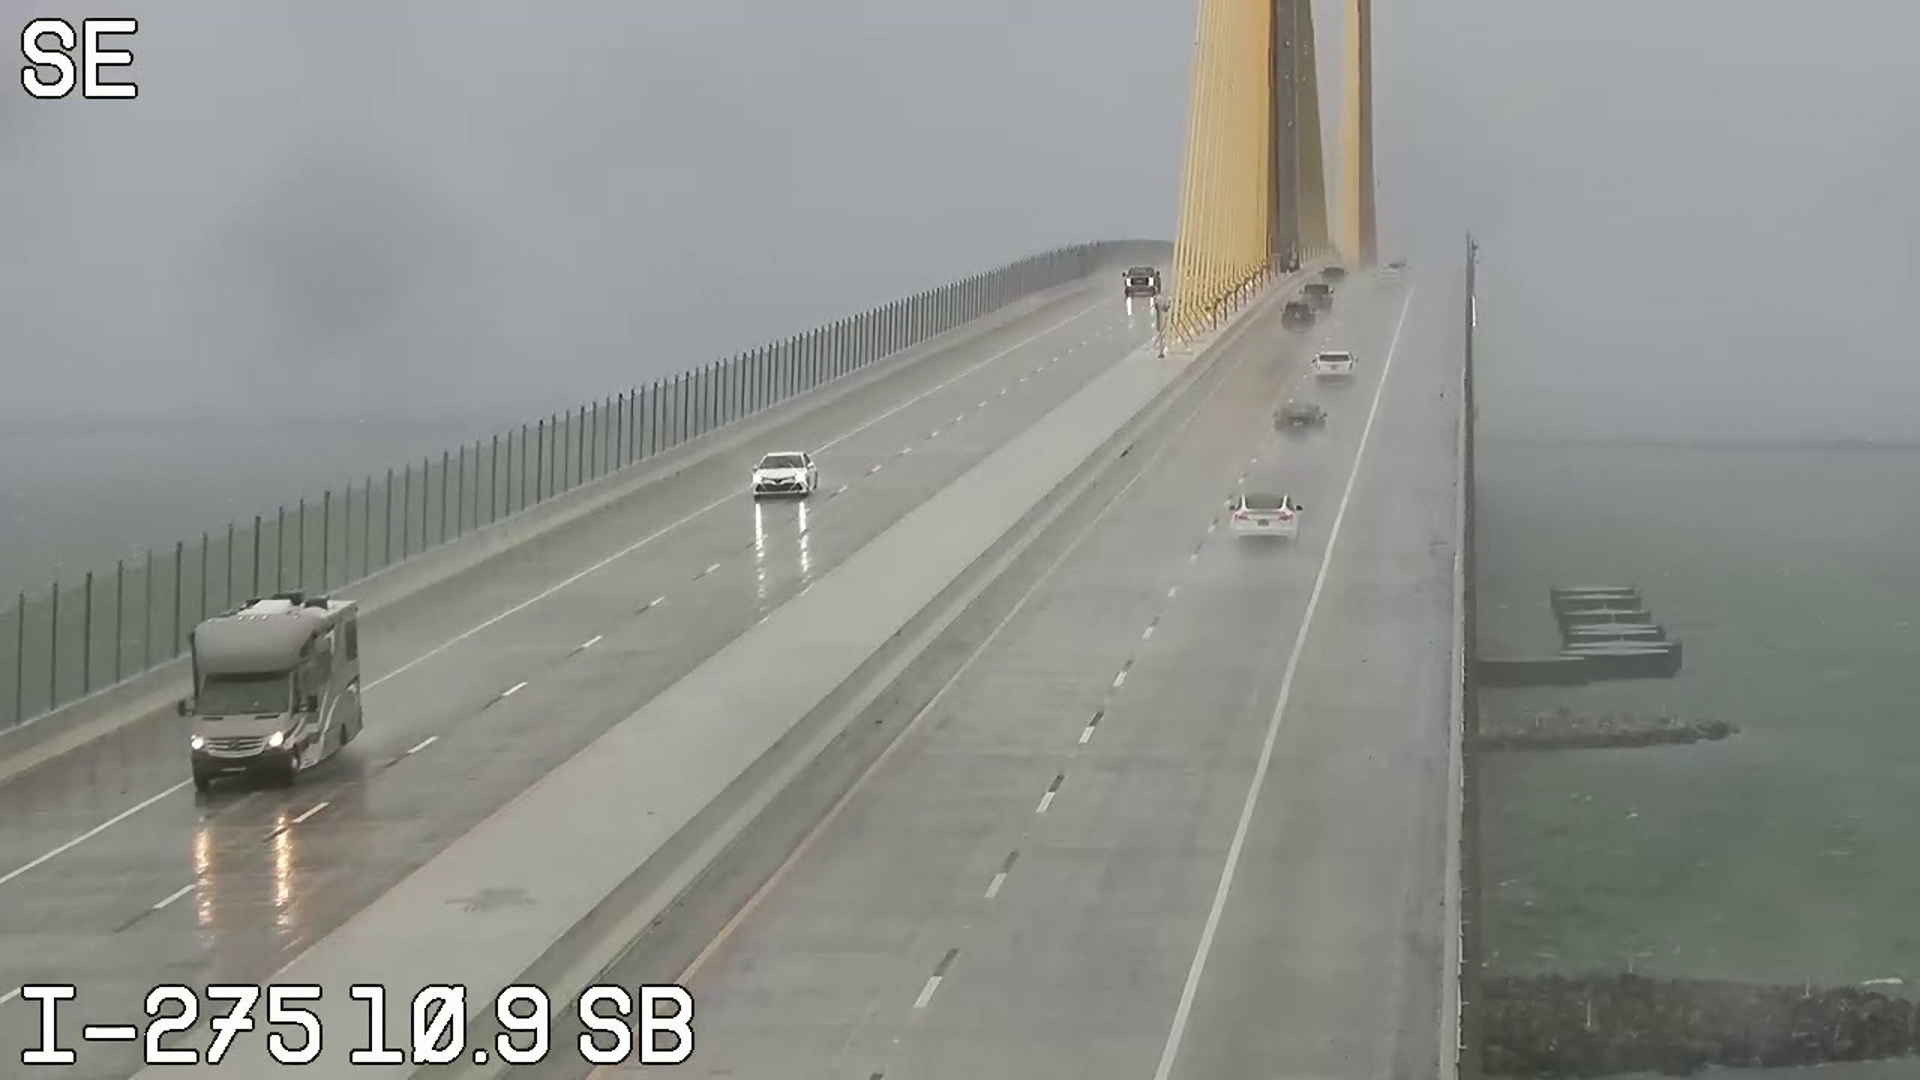 Drivers are urged to use caution while traveling across the Sunshine Skyway Bridge over Tampa Bay, where a high wind warning is in effect.